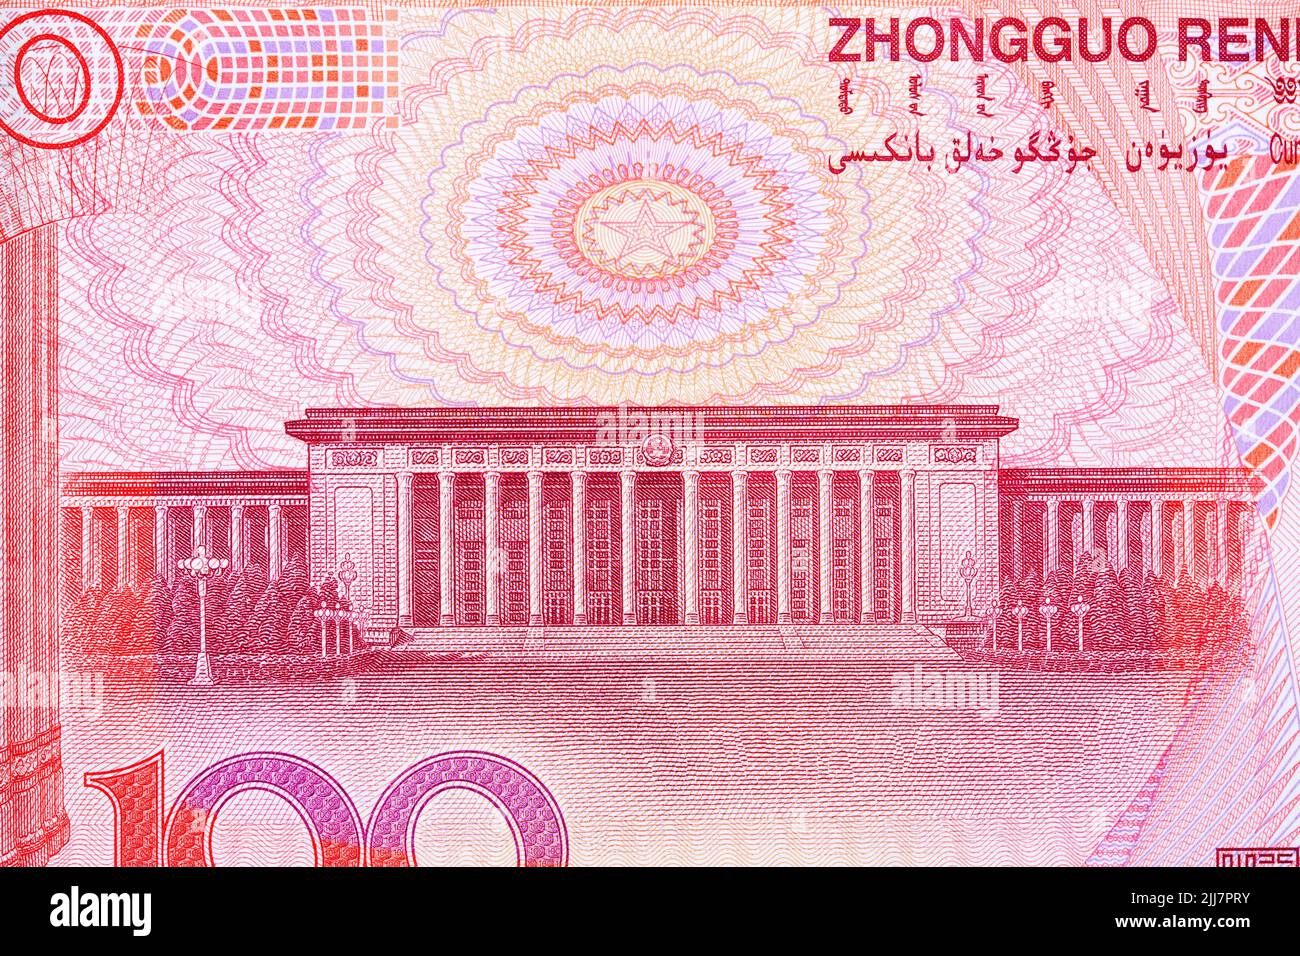 Hall of the People from Chinese money - Yuan Stock Photo